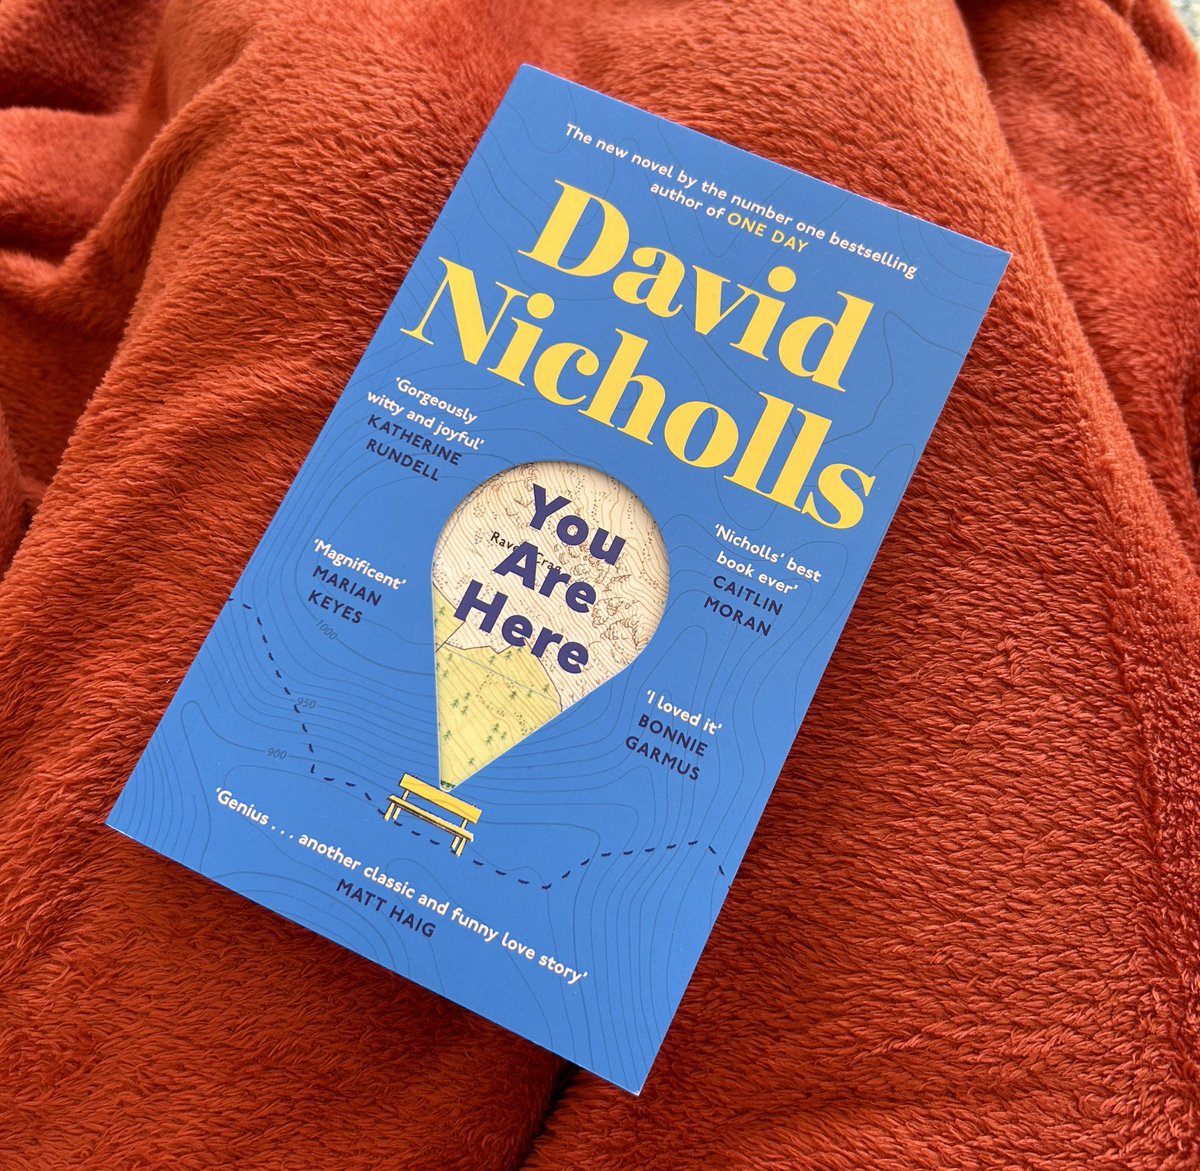 boring bedridden knee recovery suddenly made all the better by some exciting post from @DavidNWriter ✨